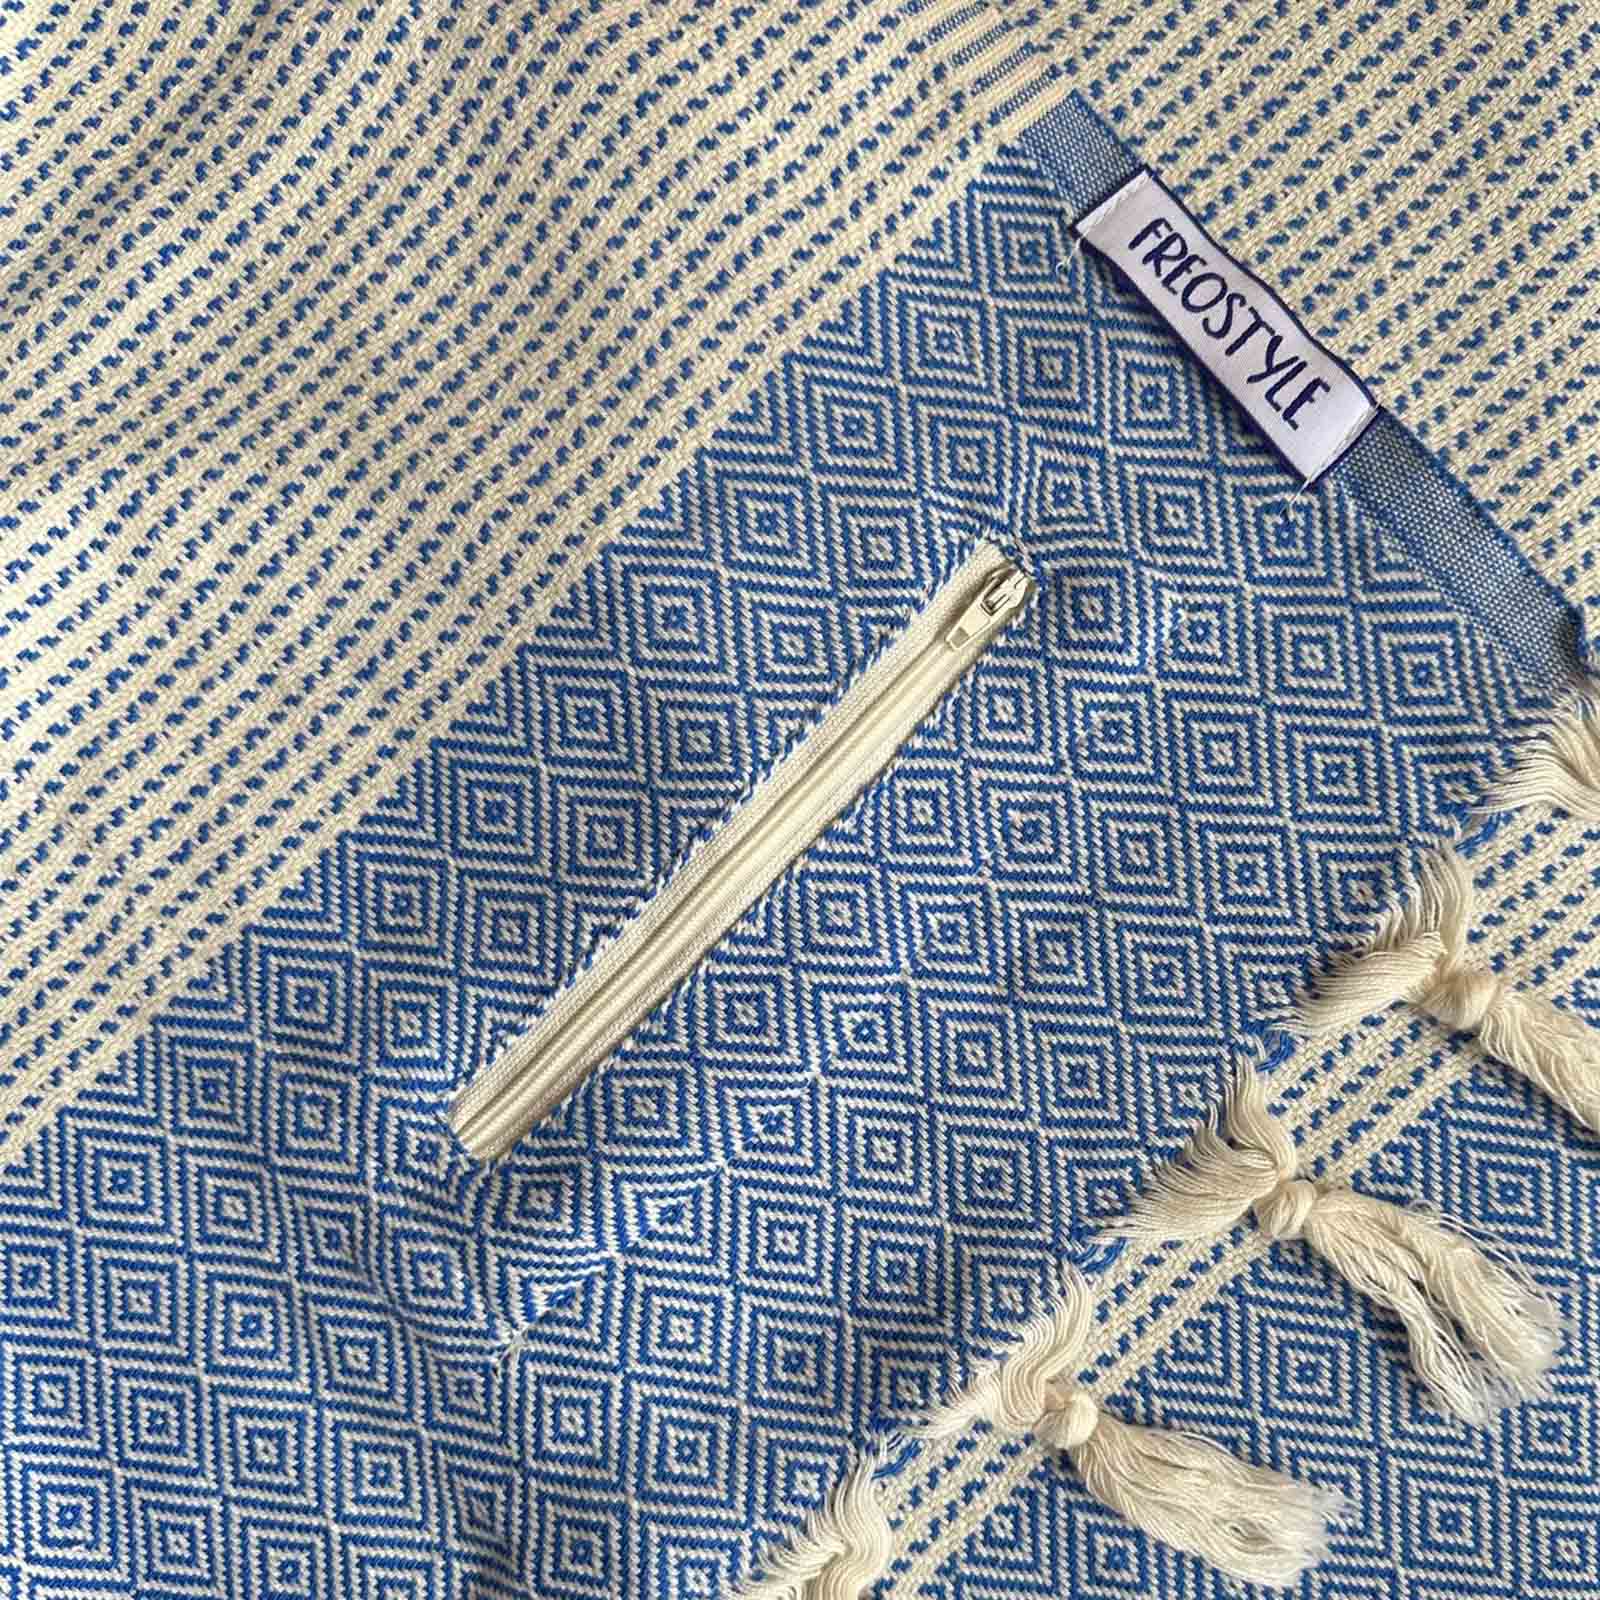 Archipelego Turkish Towel with Pockets, close up of pocket, by Freostyle